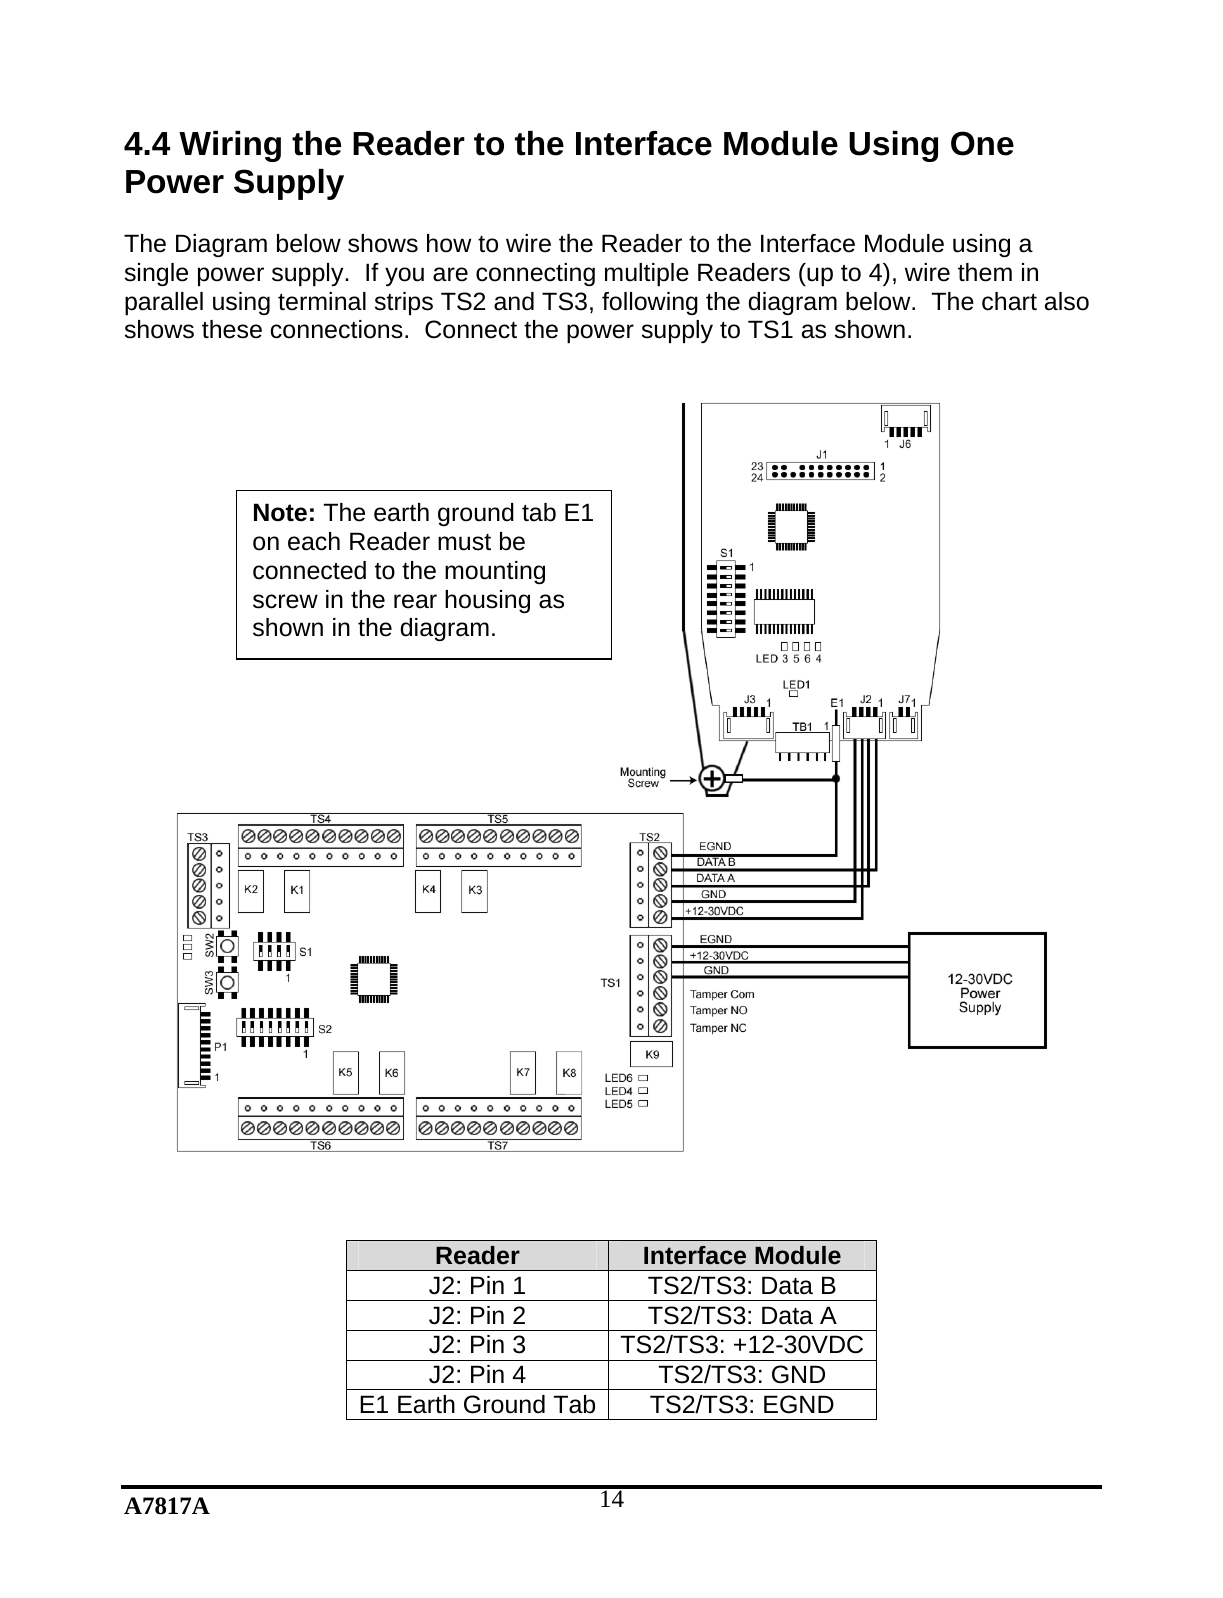 A7817A  144.4 Wiring the Reader to the Interface Module Using One Power Supply  The Diagram below shows how to wire the Reader to the Interface Module using a single power supply.  If you are connecting multiple Readers (up to 4), wire them in parallel using terminal strips TS2 and TS3, following the diagram below.  The chart also shows these connections.  Connect the power supply to TS1 as shown.                                        Reader   Interface Module  J2: Pin 1  TS2/TS3: Data B J2: Pin 2  TS2/TS3: Data A J2: Pin 3  TS2/TS3: +12-30VDCJ2: Pin 4  TS2/TS3: GND E1 Earth Ground Tab TS2/TS3: EGND Note: The earth ground tab E1 on each Reader must be connected to the mounting screw in the rear housing as shown in the diagram. 